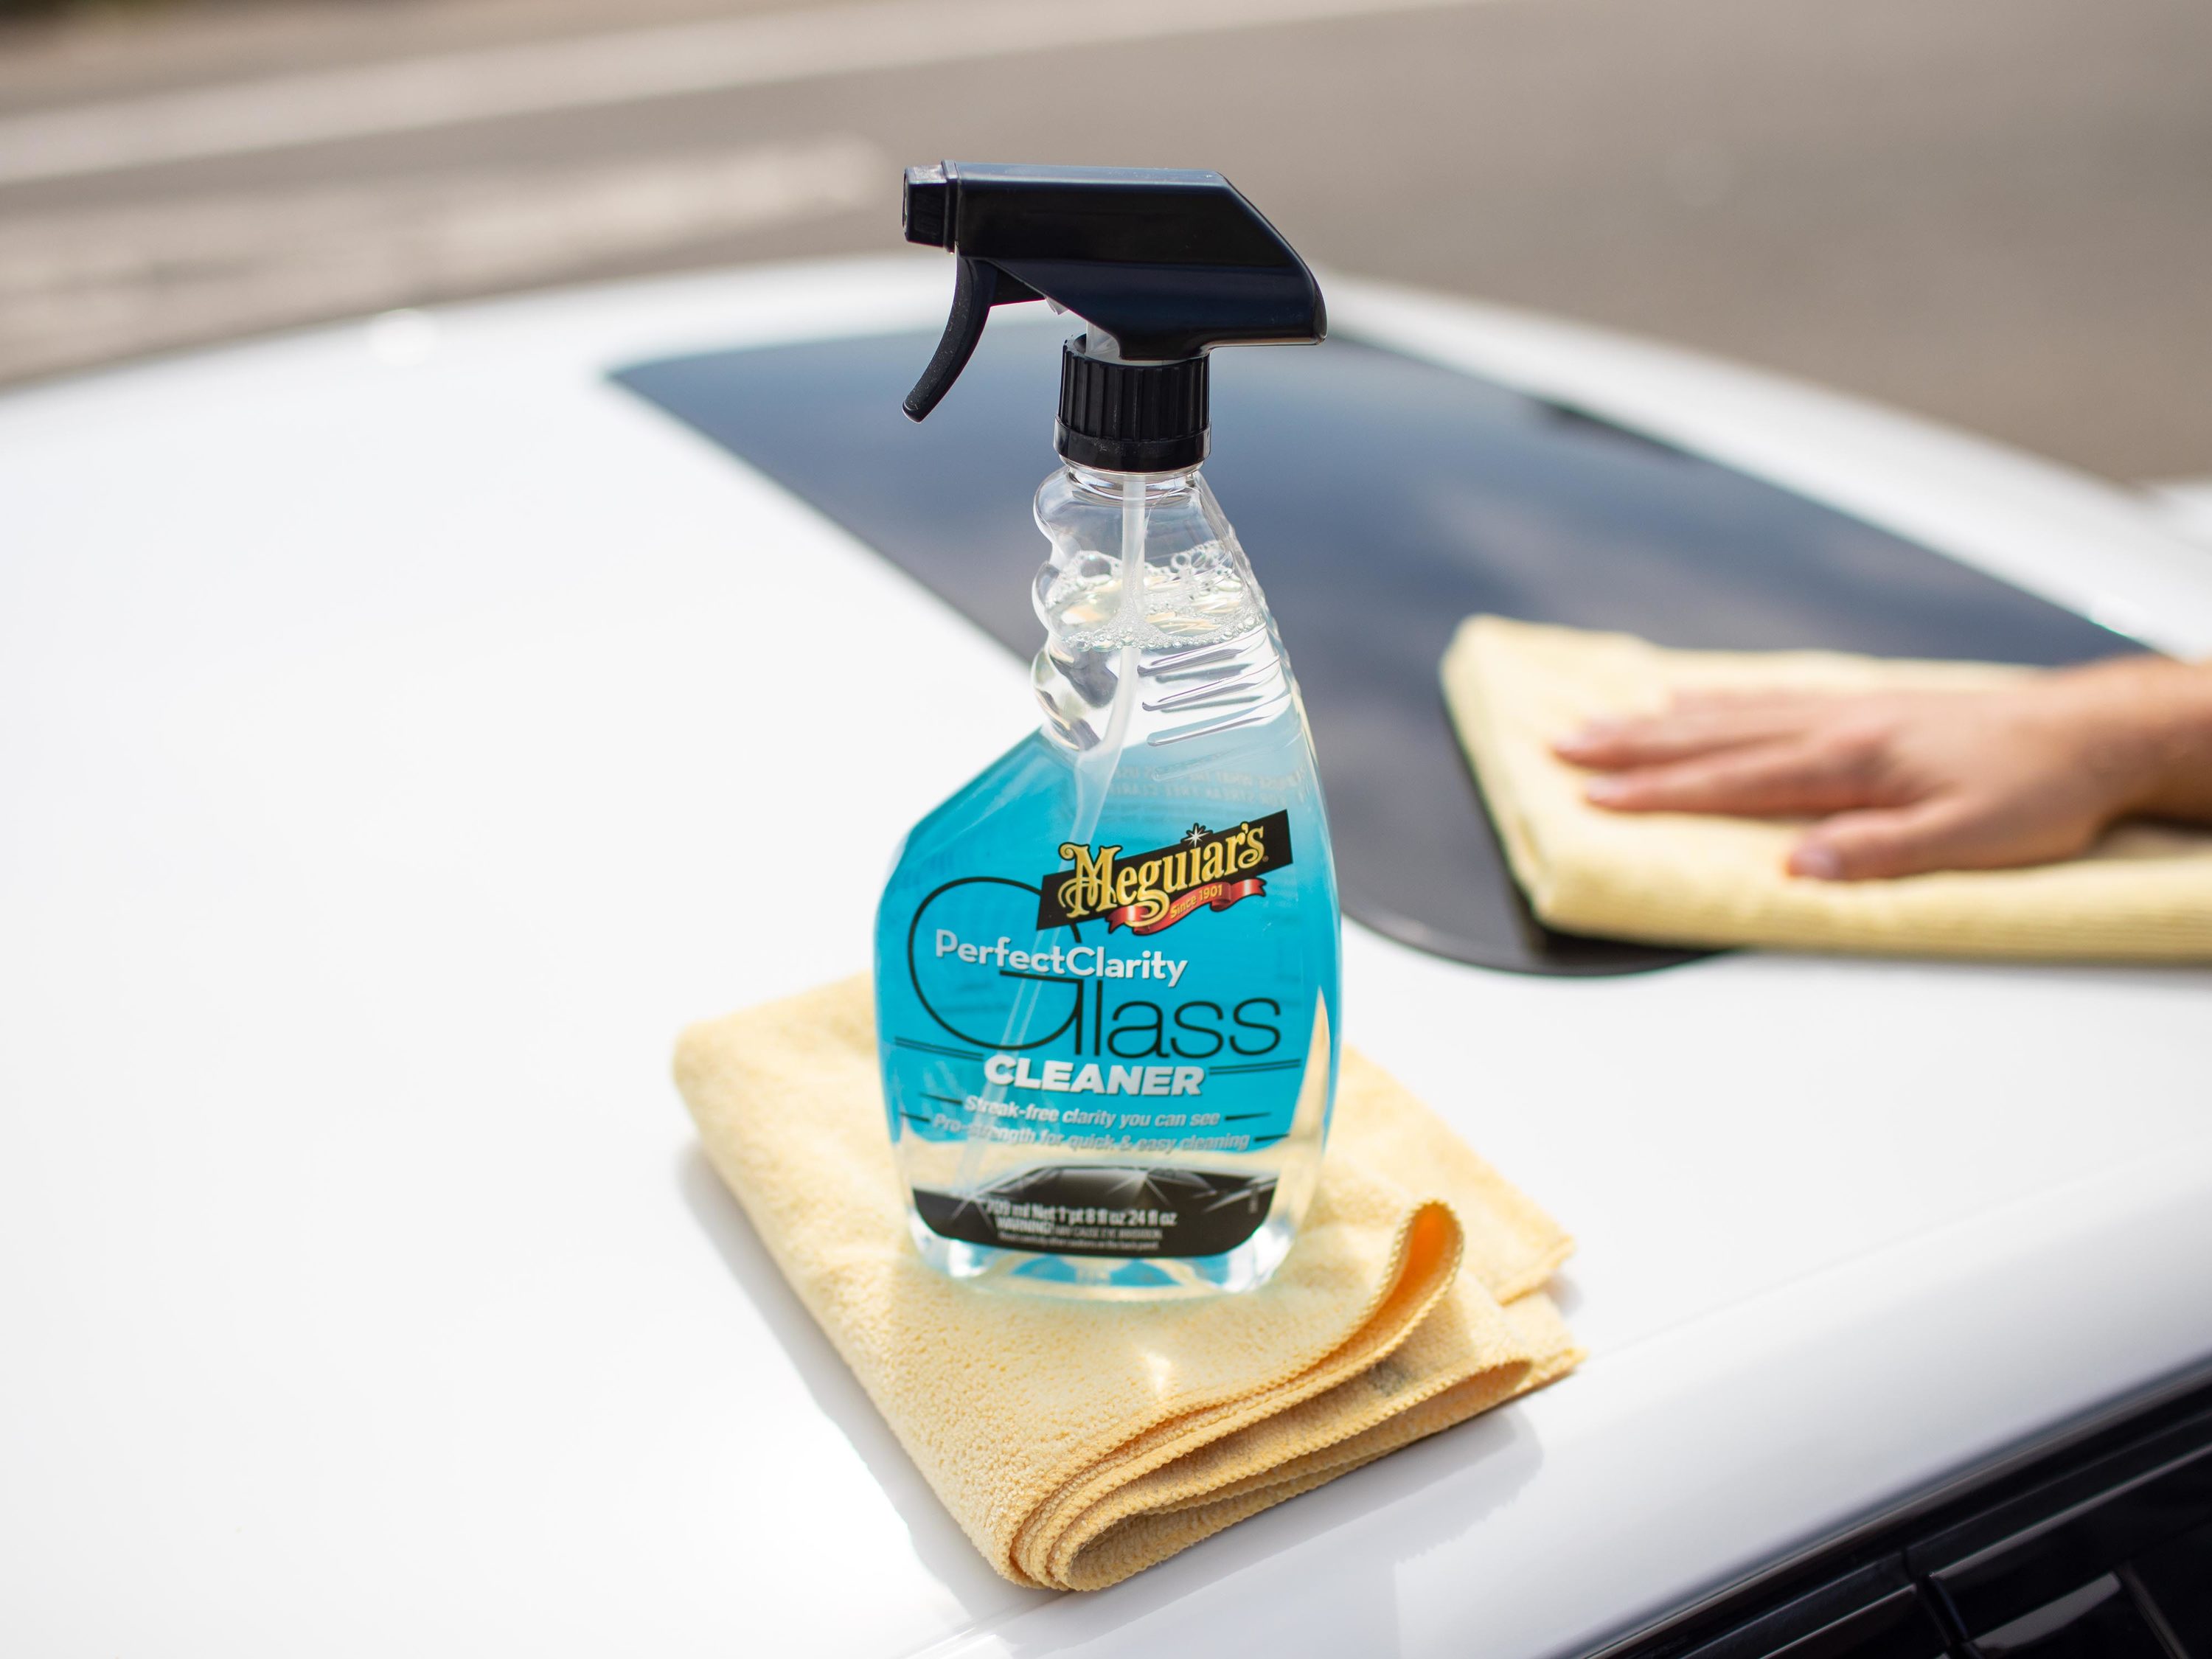 Meguiar's Ultimate Glass Cleaner & Water Repellent - Premium Glass and  Window Cleaner for Quick Cleaning with Hydrophobic Technology that Acts as  a Rain Repellent Improving Visibility in Rain, 16oz